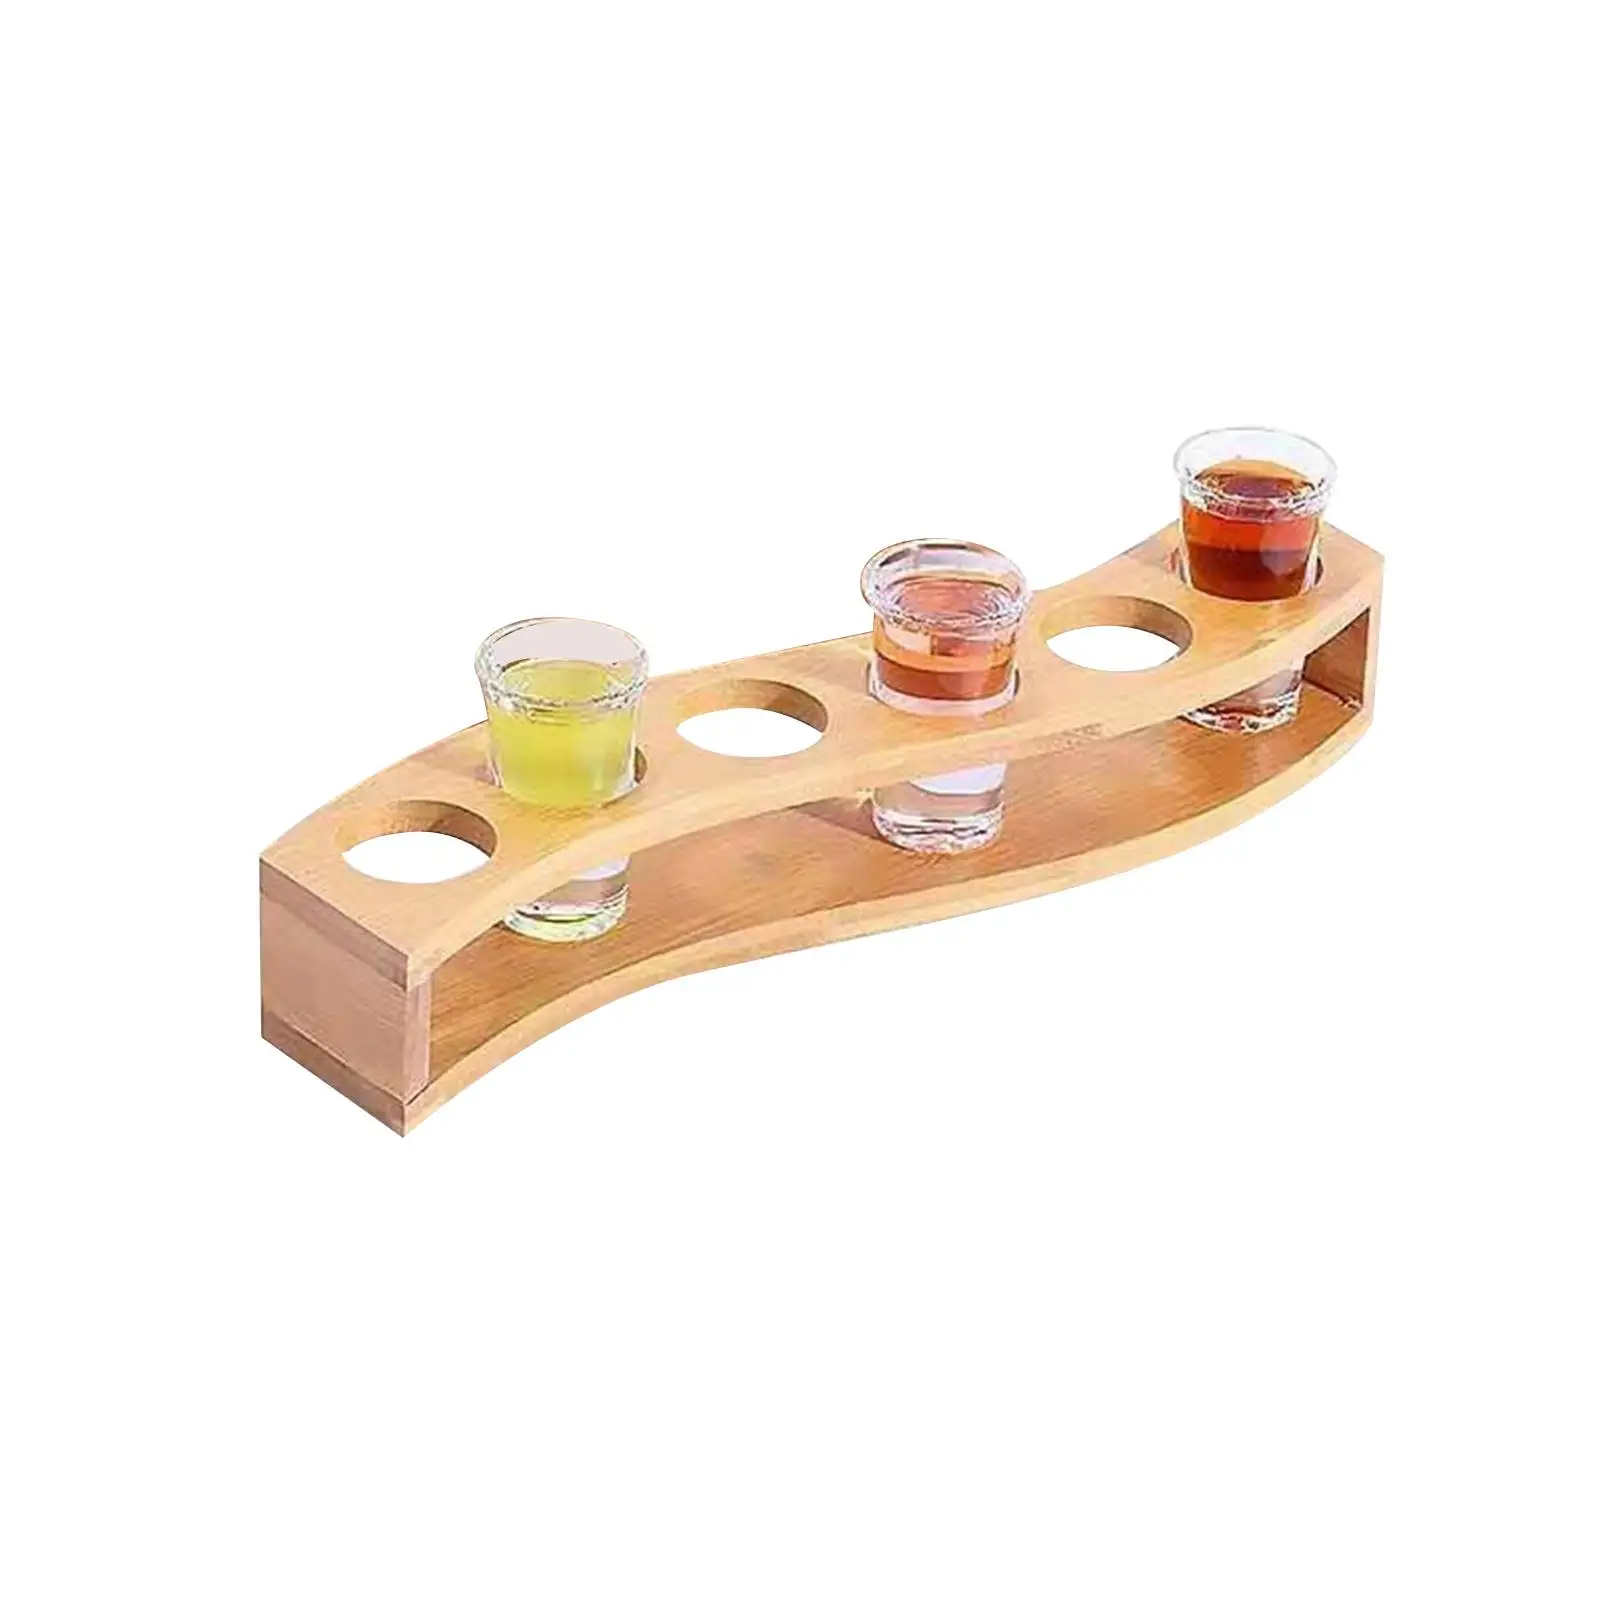 6 Holes Glass Holder Drinkware Serving Tray Cup Rack Accessories Organizer Wood for Club Party